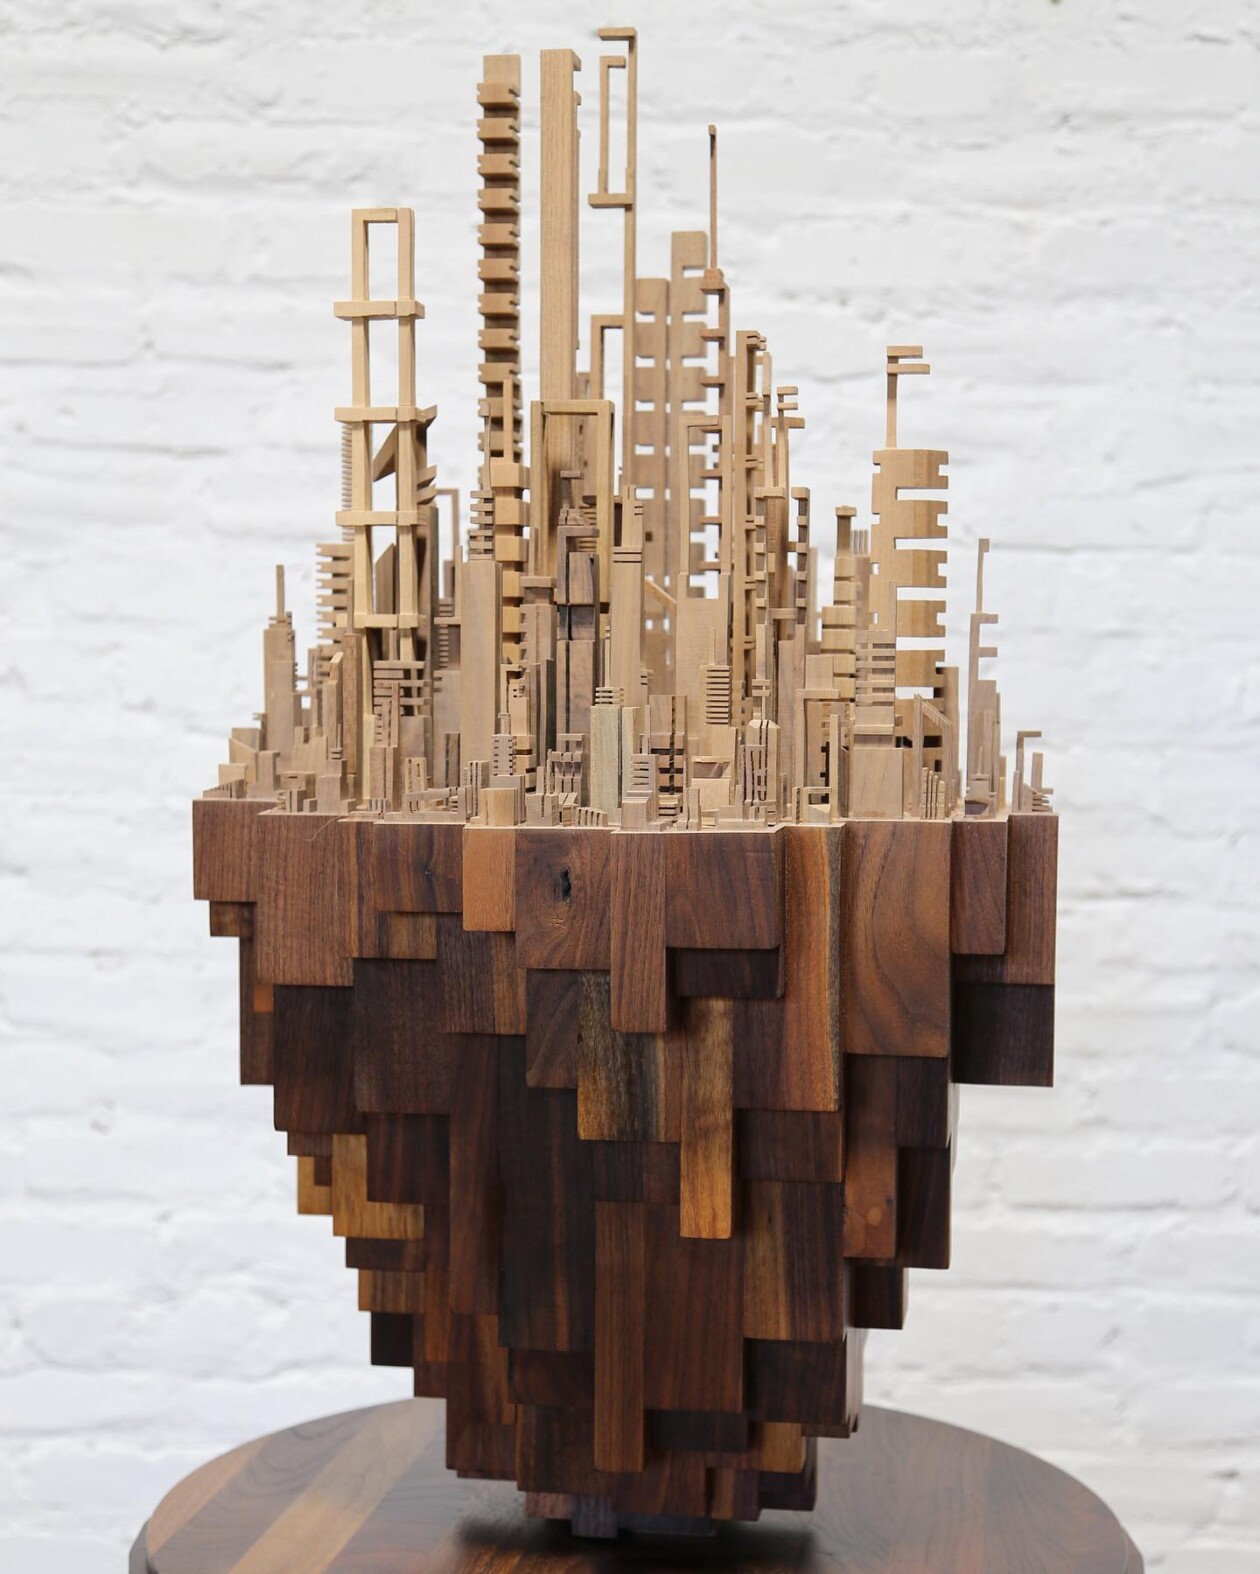 Intricate Cityscape Sculptures Made From Scrap Wood By James Mcnabb (3)